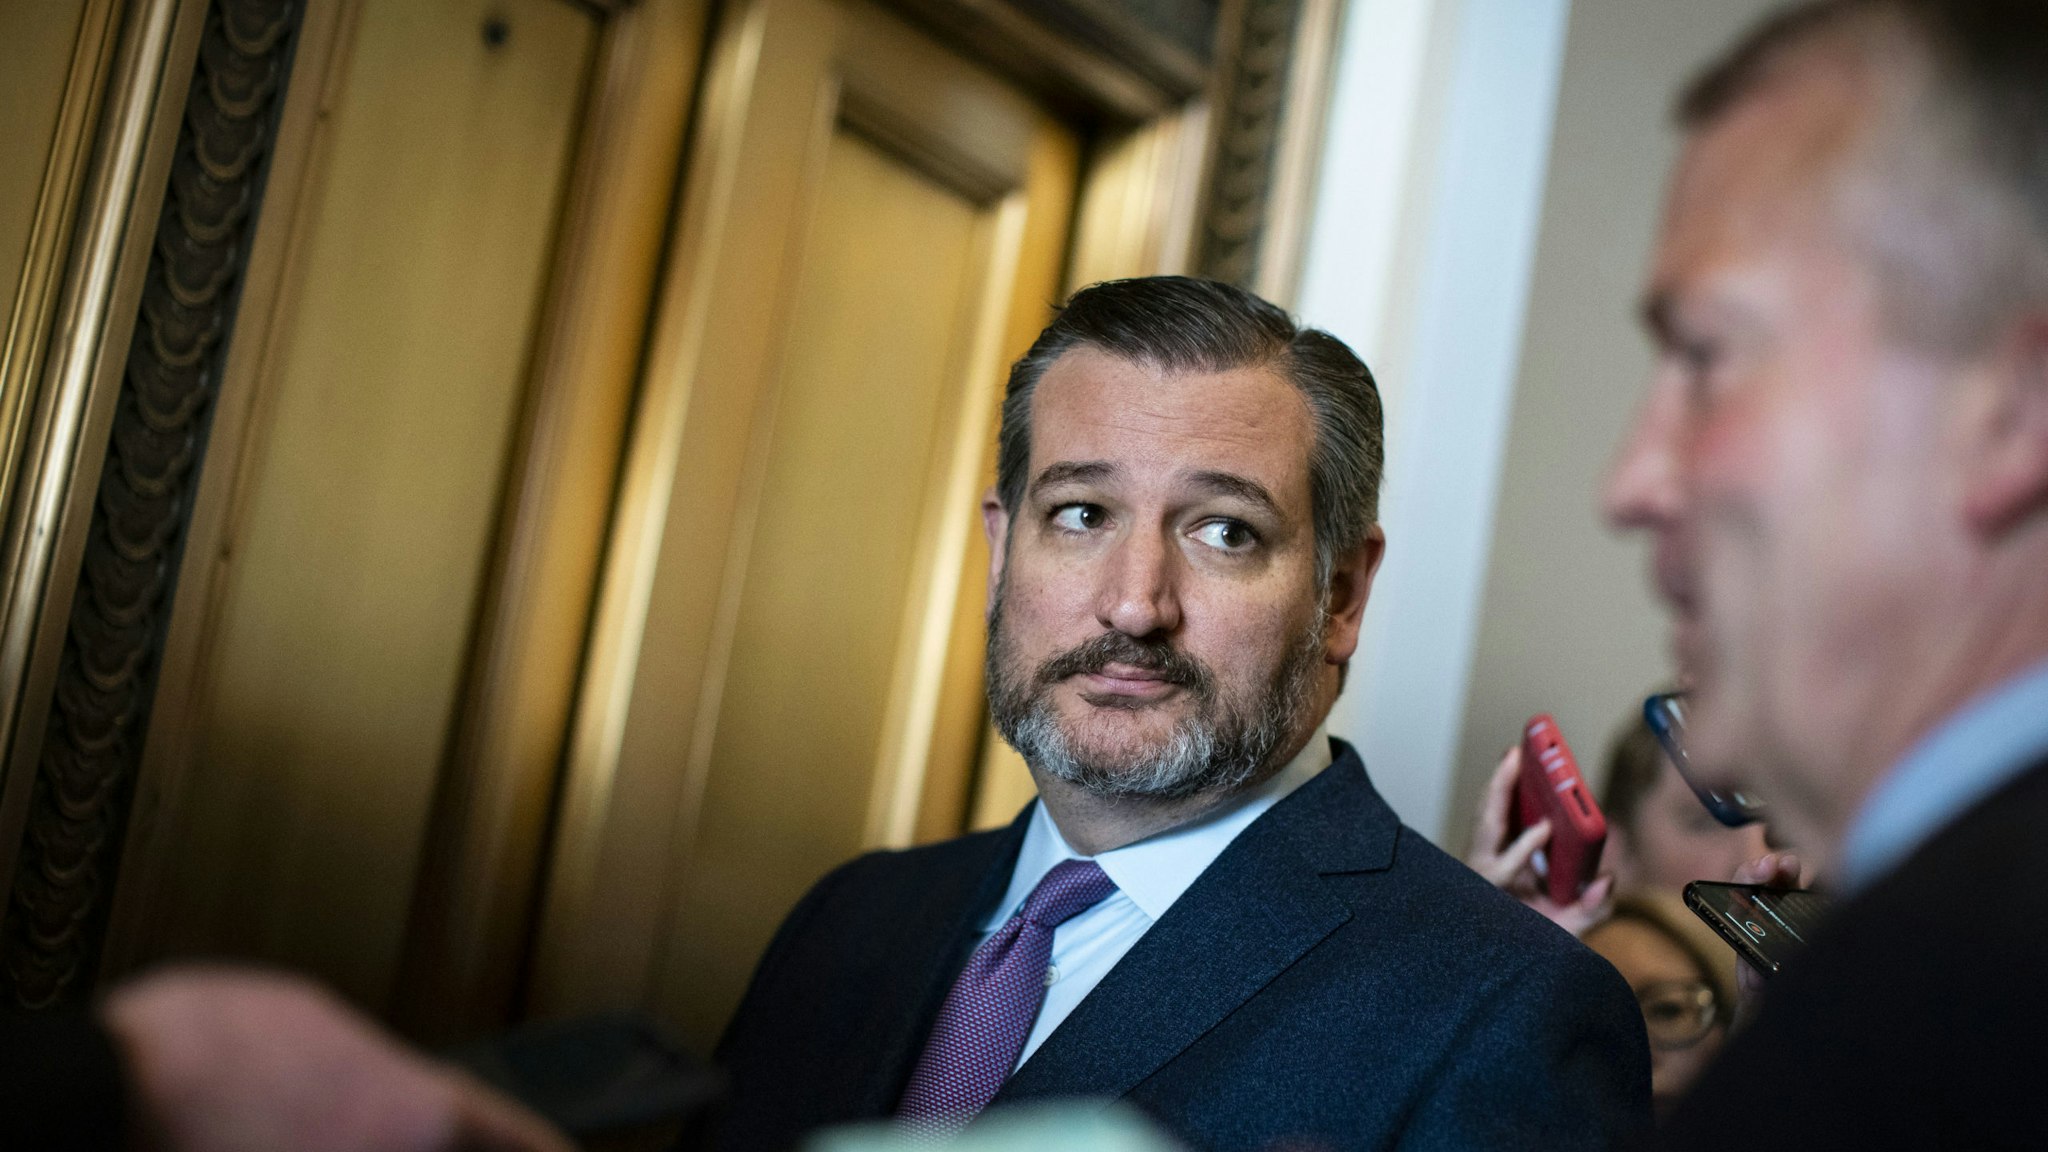 Senator Ted Cruz, a Republican from Texas, listens to a question while exiting a caucus meeting on Capitol Hill in Washington, D.C., U.S., on Wednesday, March 18, 2020. The Senate cleared the second major bill responding to the coronavirus pandemic, with lawmakers rushing to follow up with an additional economic rescue package that President Donald Trump's administration estimates will cost $1.3 trillion. Photographer: Al Drago/Bloomberg via Getty Images